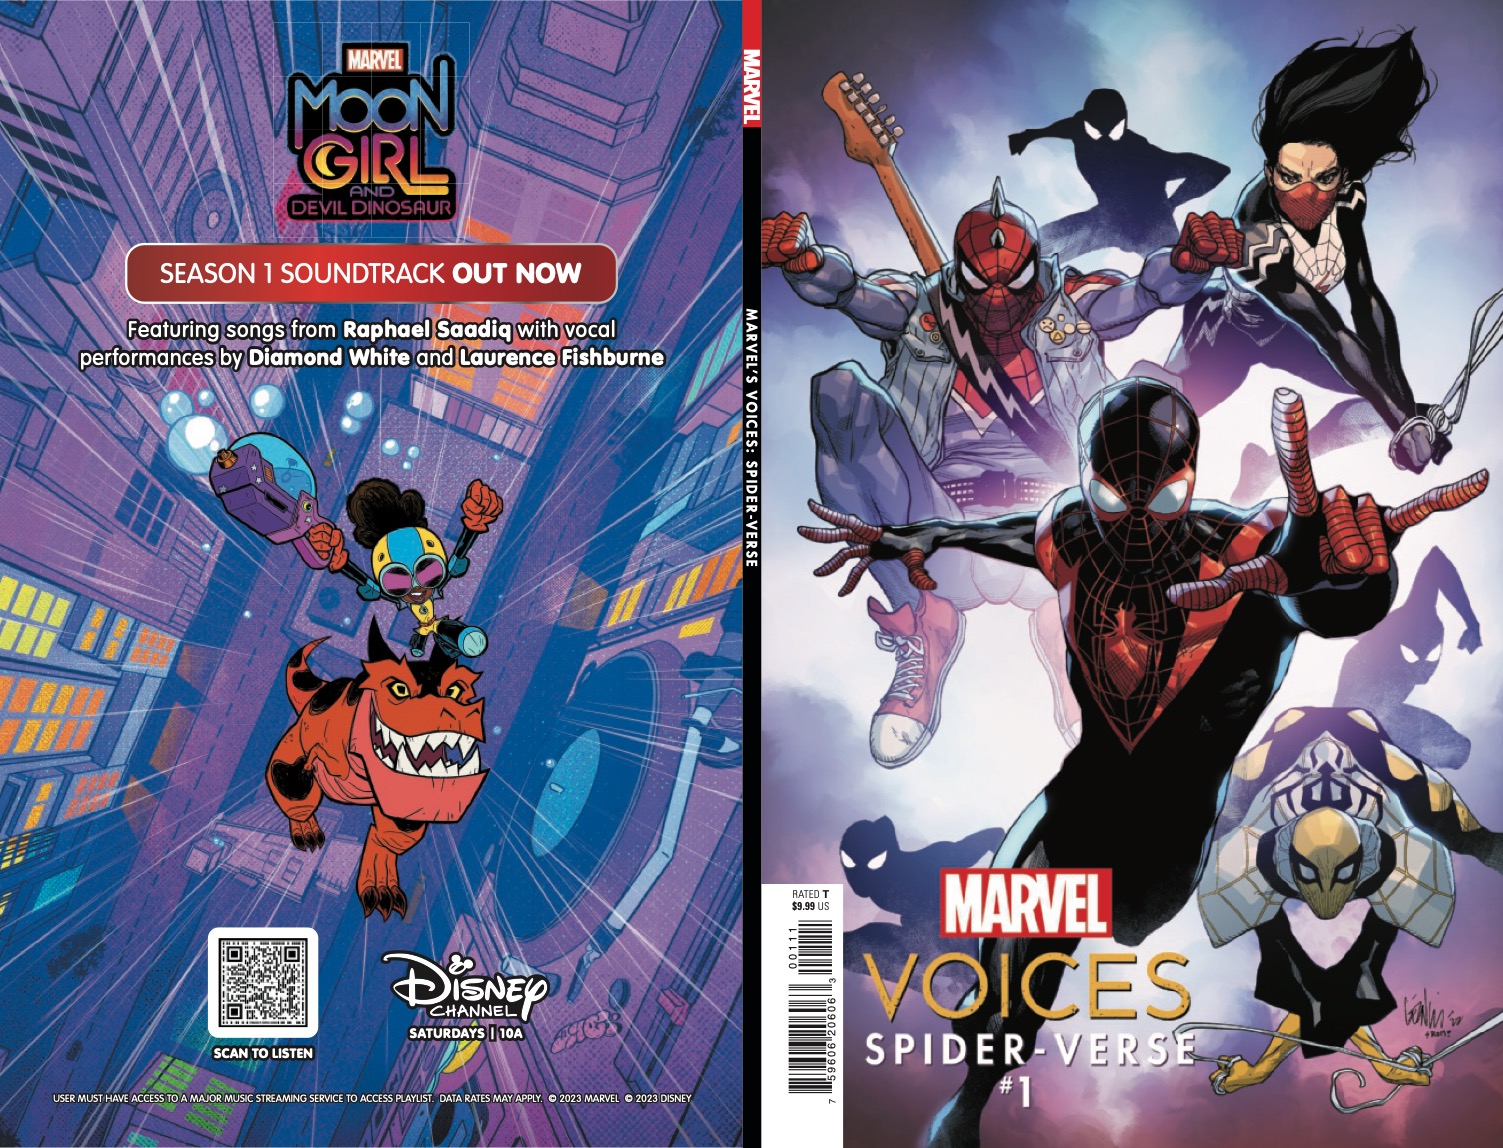 Marvel Preview: Marvel's Voices: Spider-Verse #1